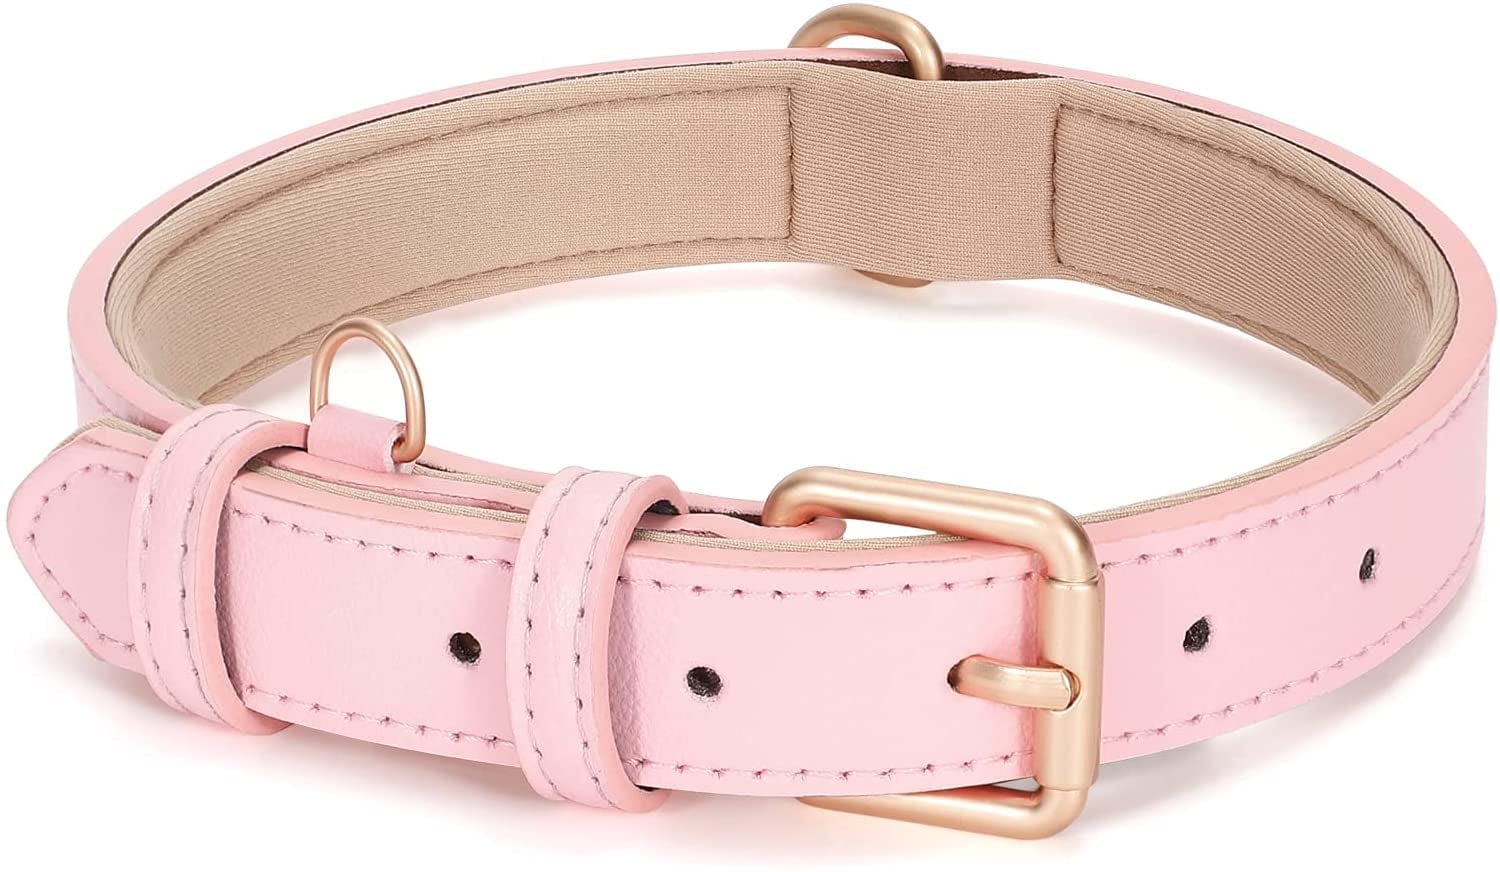 WHIPPY Airtag Leather Dog Collar GPS Tracker Air Tag Puppy Collar Adjustable Soft Leather Padded Dog Collar with Airtag Holder Case for Small Medium Large Dog Pet Backpack,Pink,M Electronics > GPS Accessories > GPS Cases WHIPPY A-pink L:Neck 20"-23",Width1.18" 